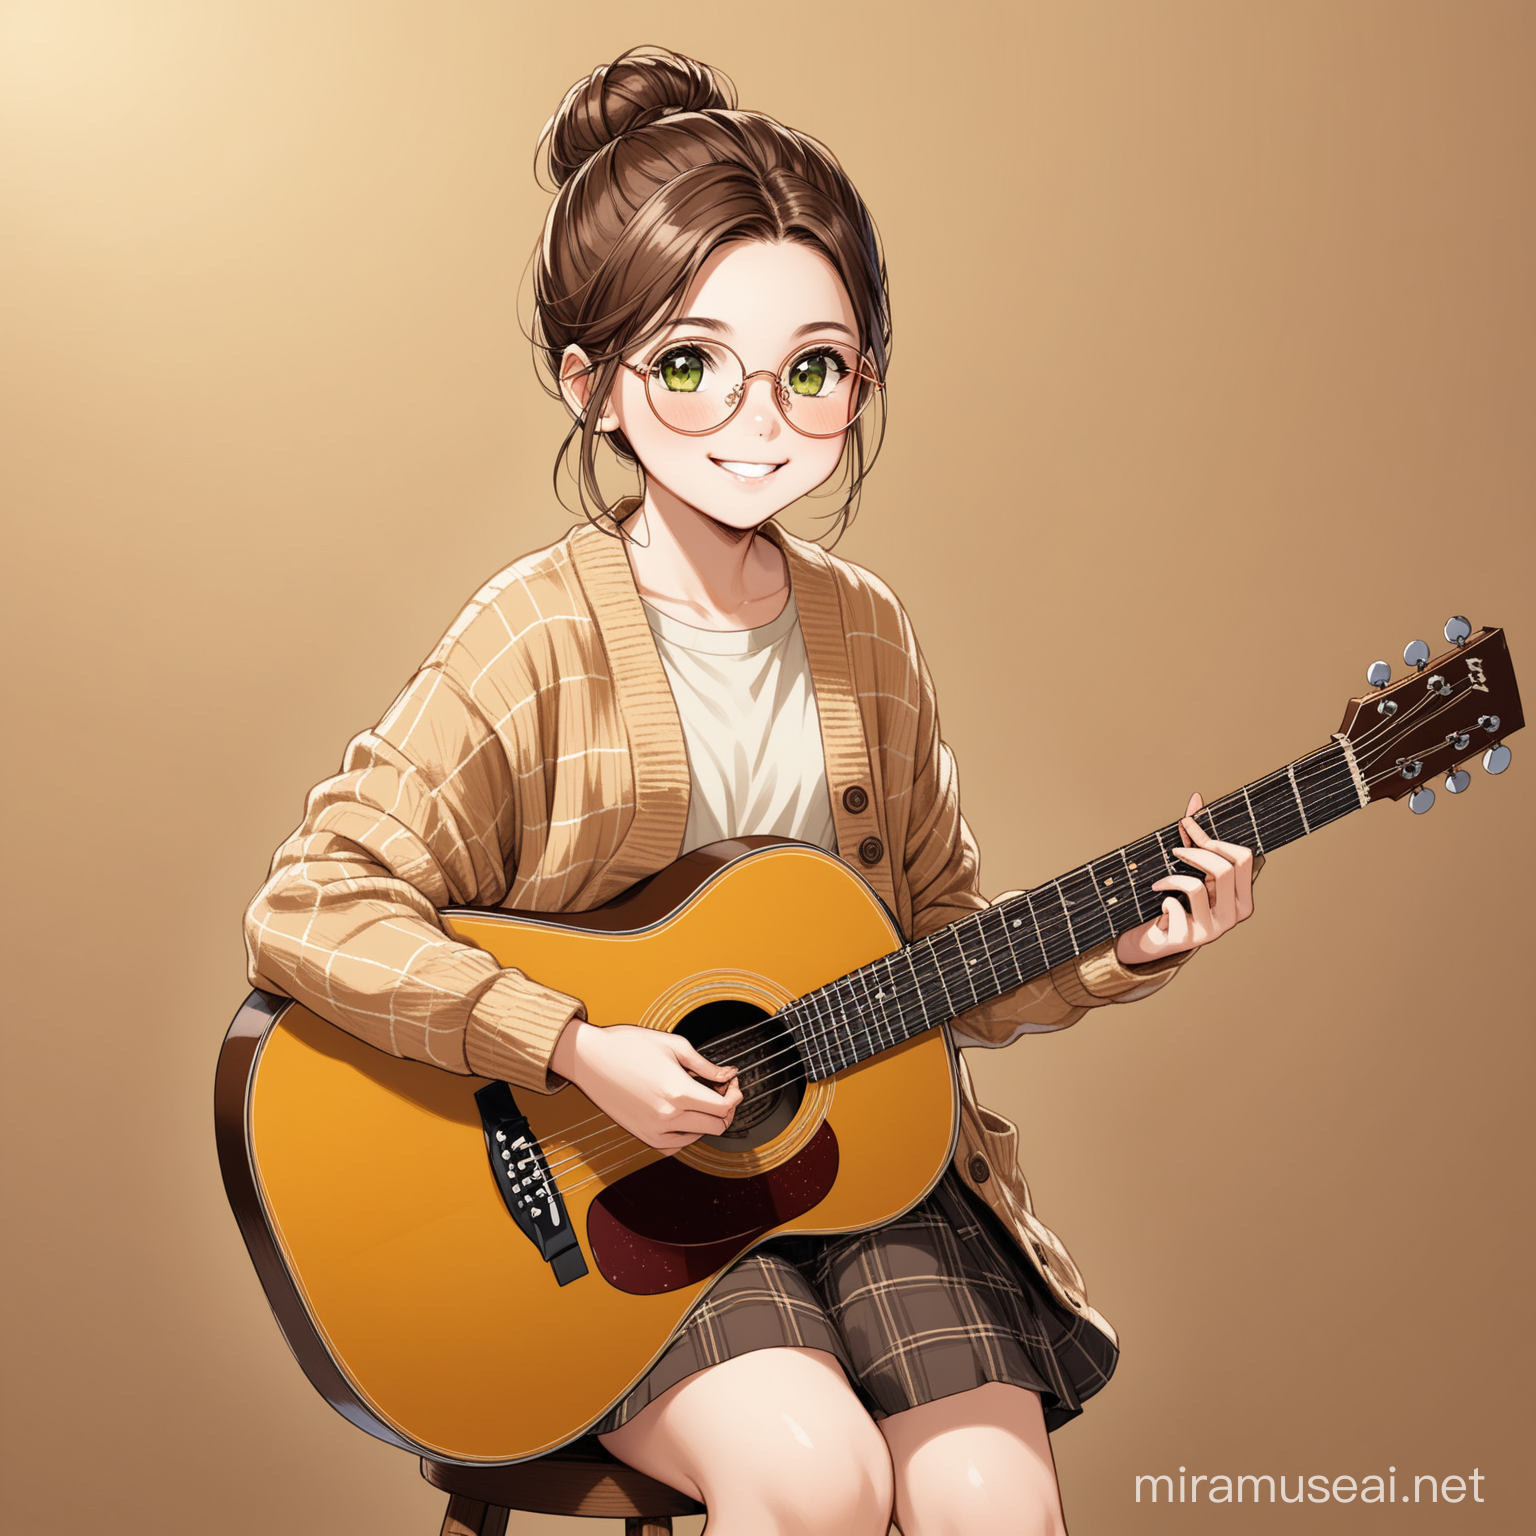 Cheerful 11YearOld Girl Playing Guitar on Wooden Stool with Stylish Attire